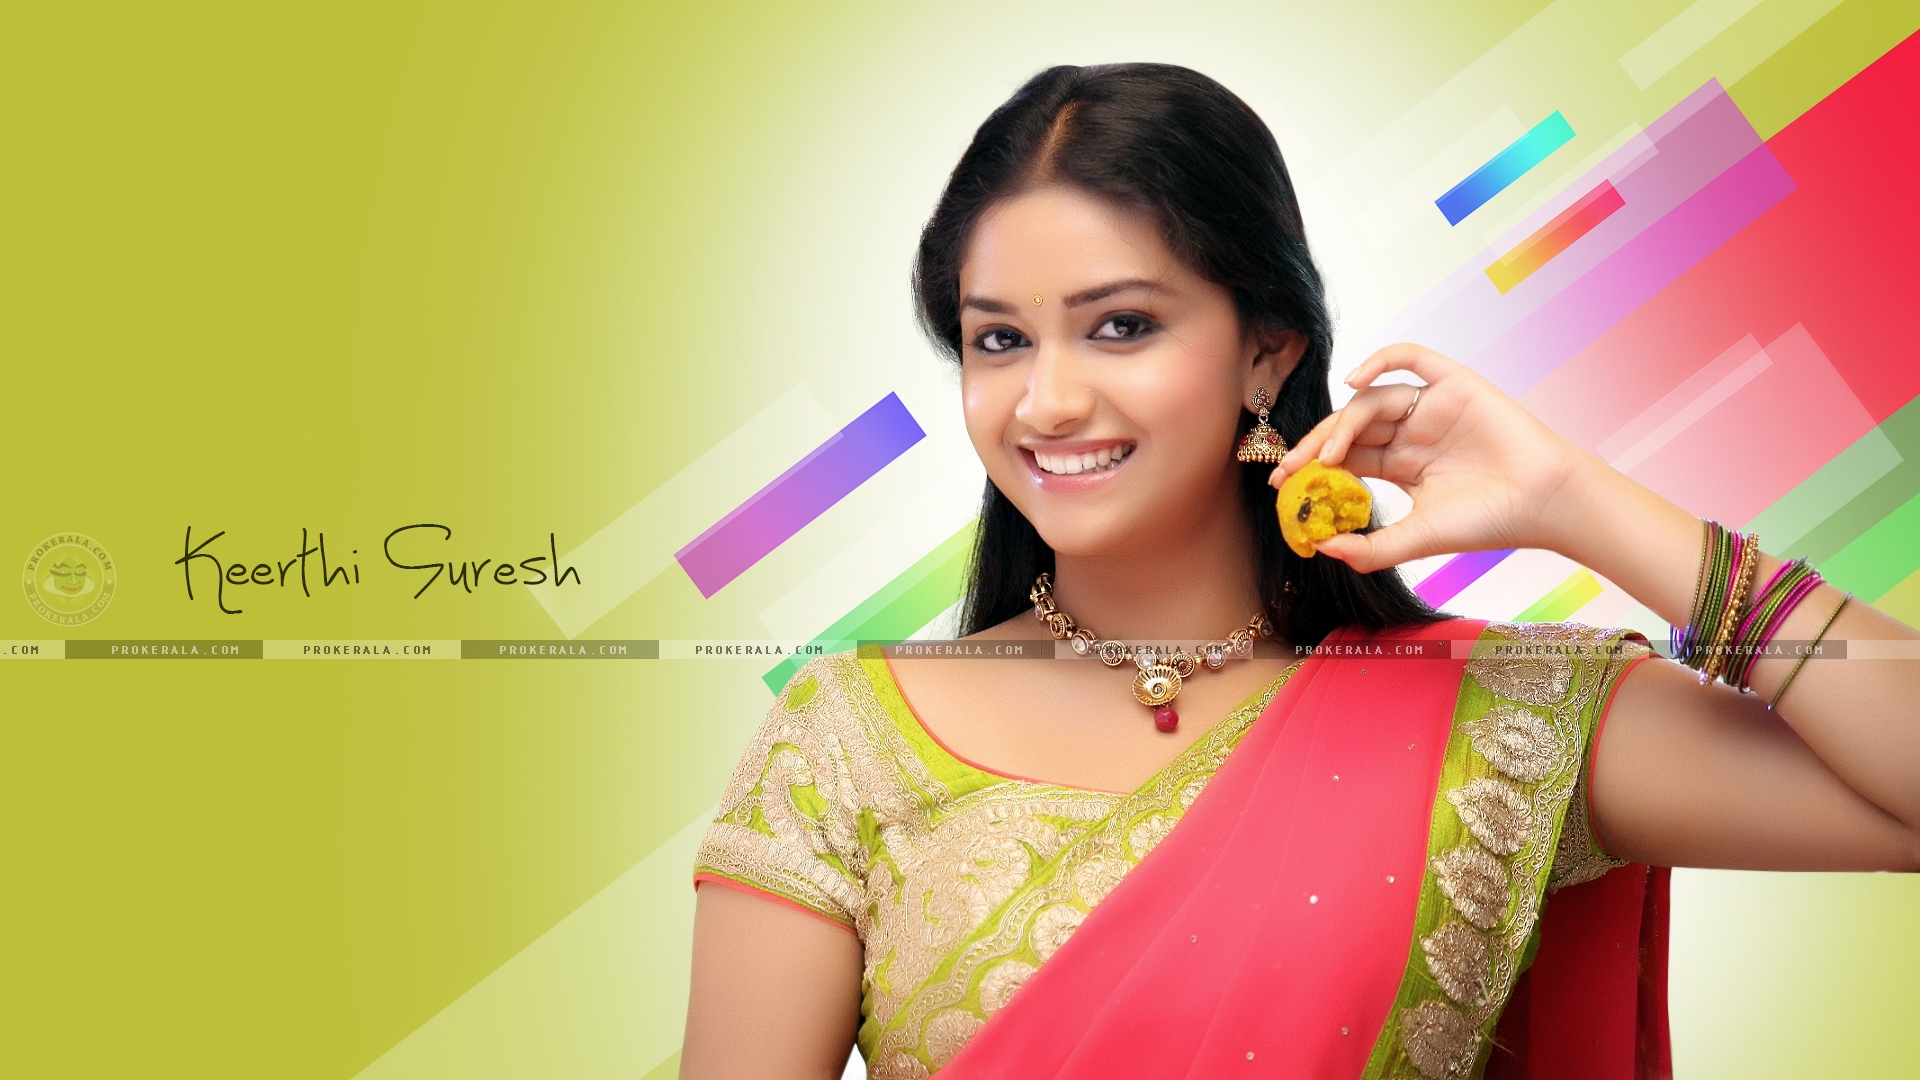 Keerthy Suresh Latest Hot HD PhotosWallpapers 1080p4k